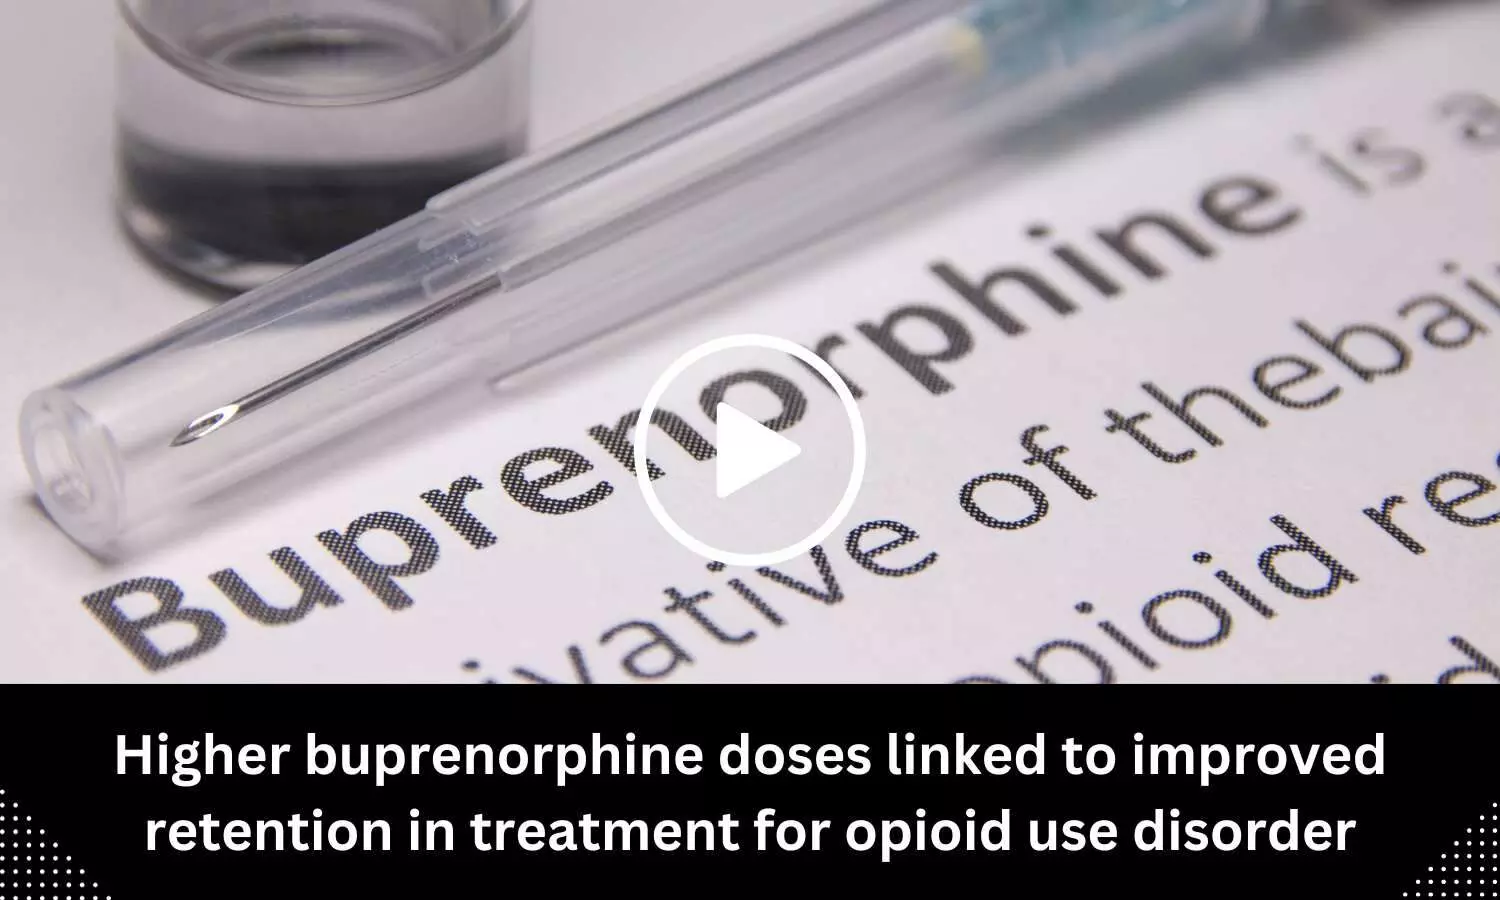 Higher buprenorphine doses linked to improved retention in treatment for opioid use disorder